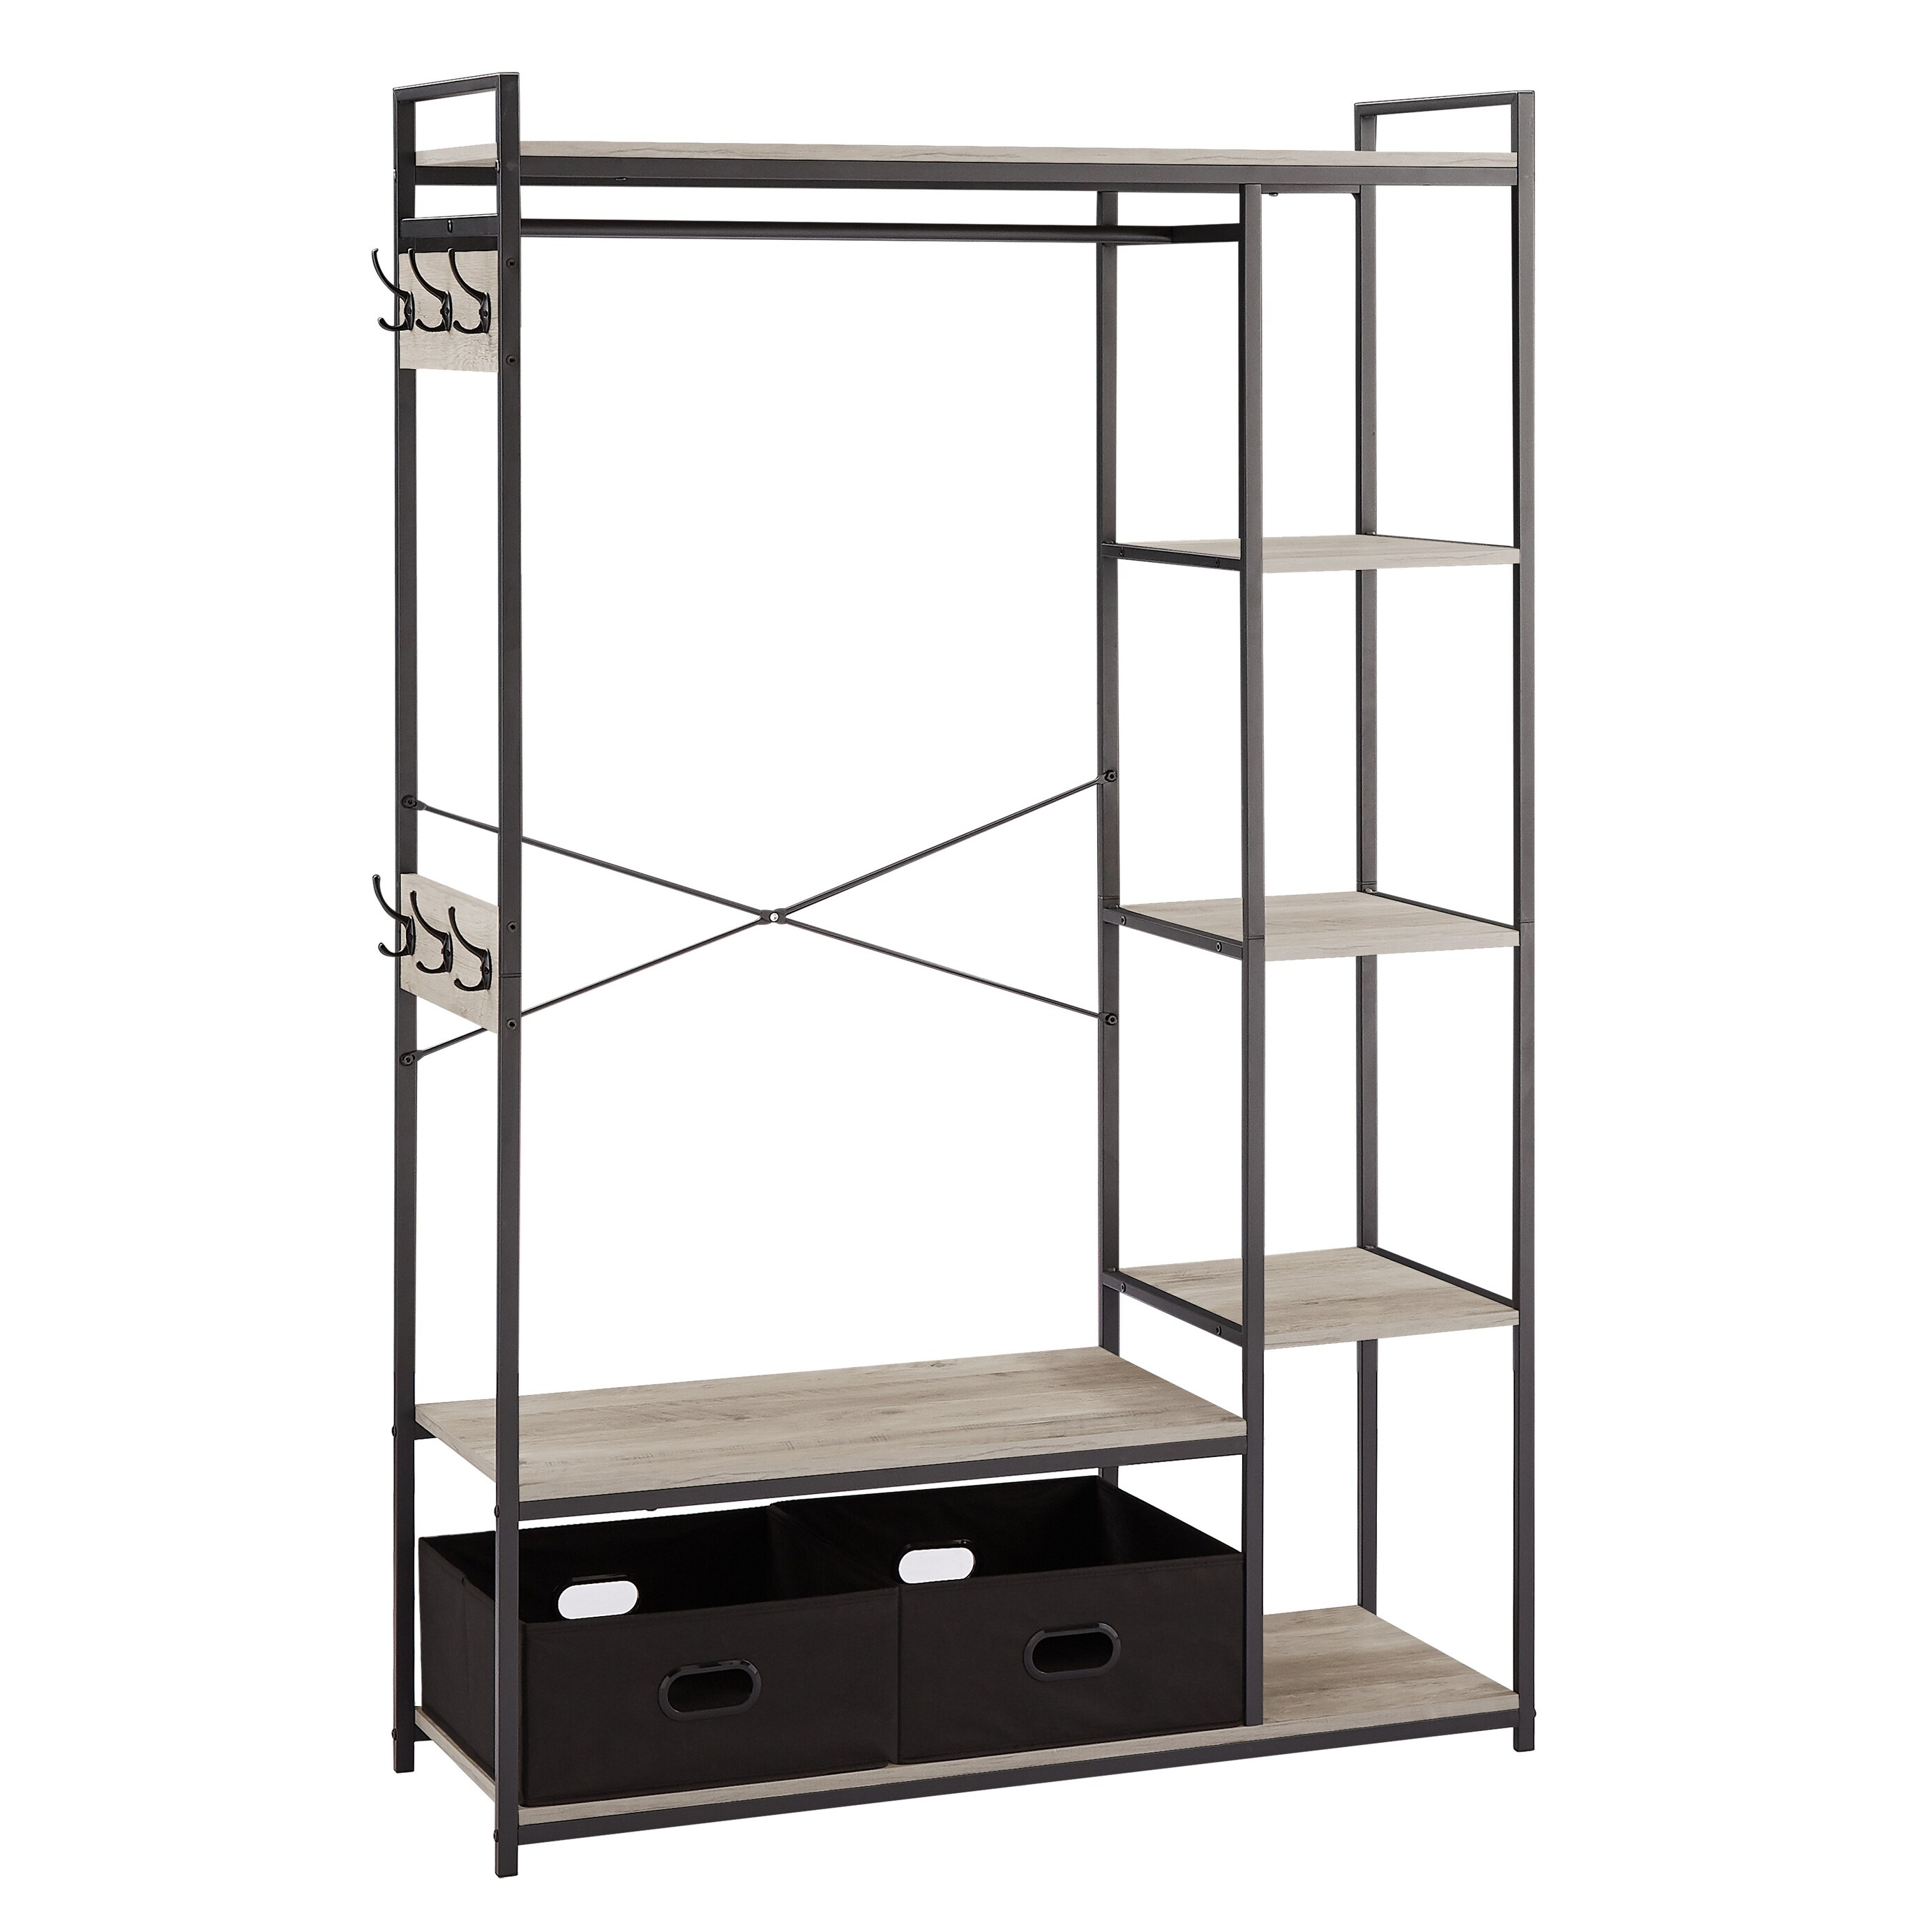 https://ak1.ostkcdn.com/images/products/is/images/direct/42295ebdb40f1c4317d3056024566c485b7d16b9/Free-Standing-Closet-Organizer%2C-Portable-Garment-Rack-with-Open-Shelves-and-Hanging-Rod%2C-Black-Metal-Frame.jpg